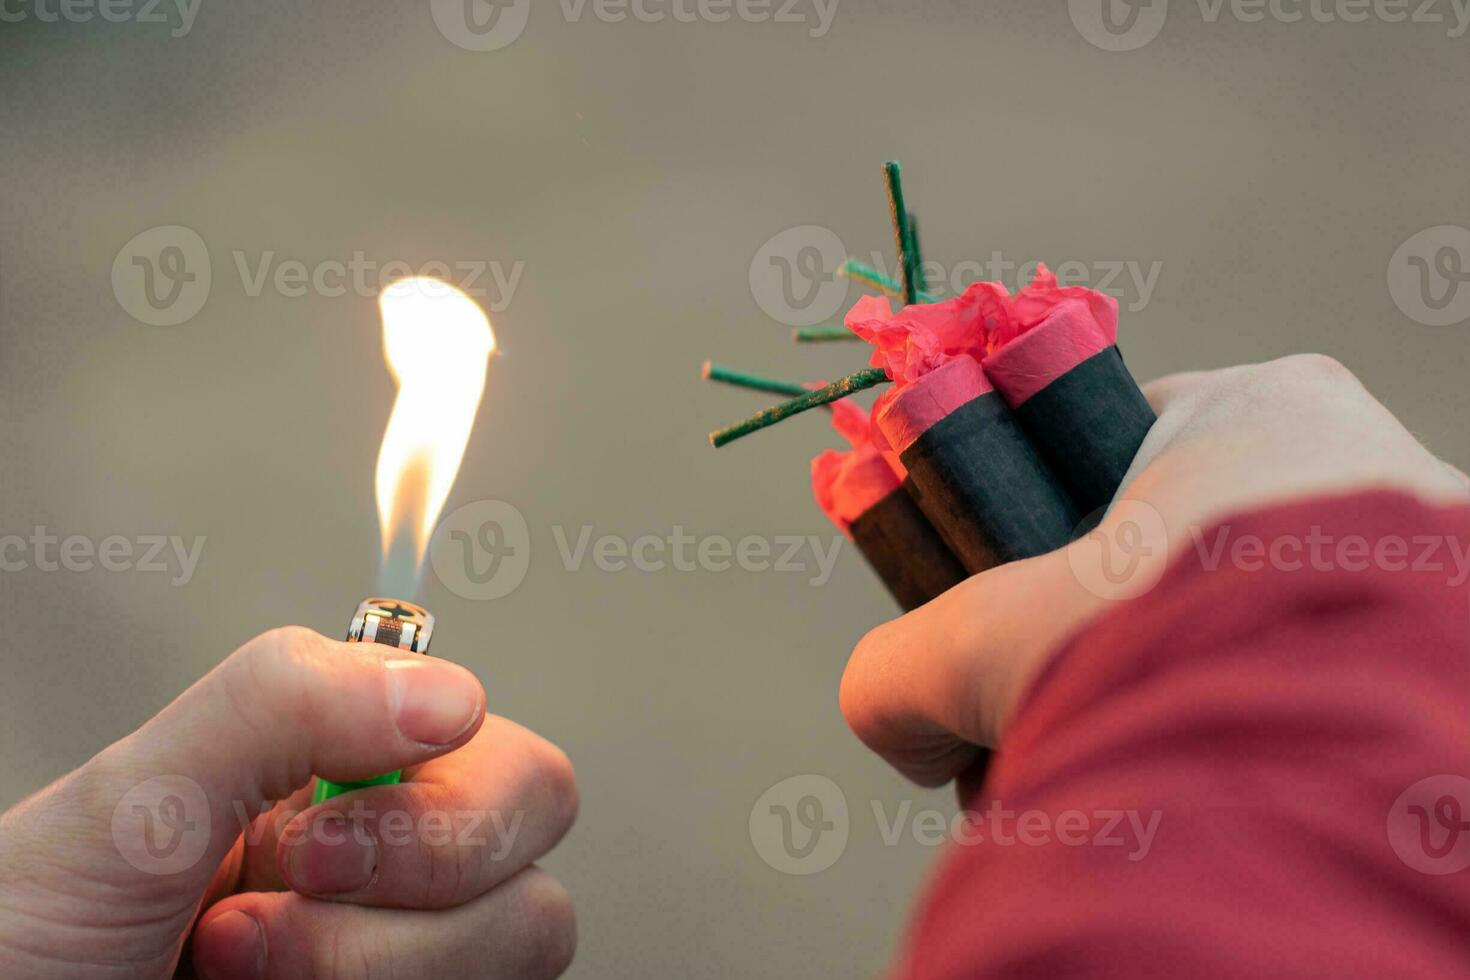 Man Lighting Up Several Firecrackers in his Hand Using Gasoline Lighter. Guy Getting Ready for New Year Fun with Fireworks or Pyrotechnic Products CloseUp Shot, Rear View photo